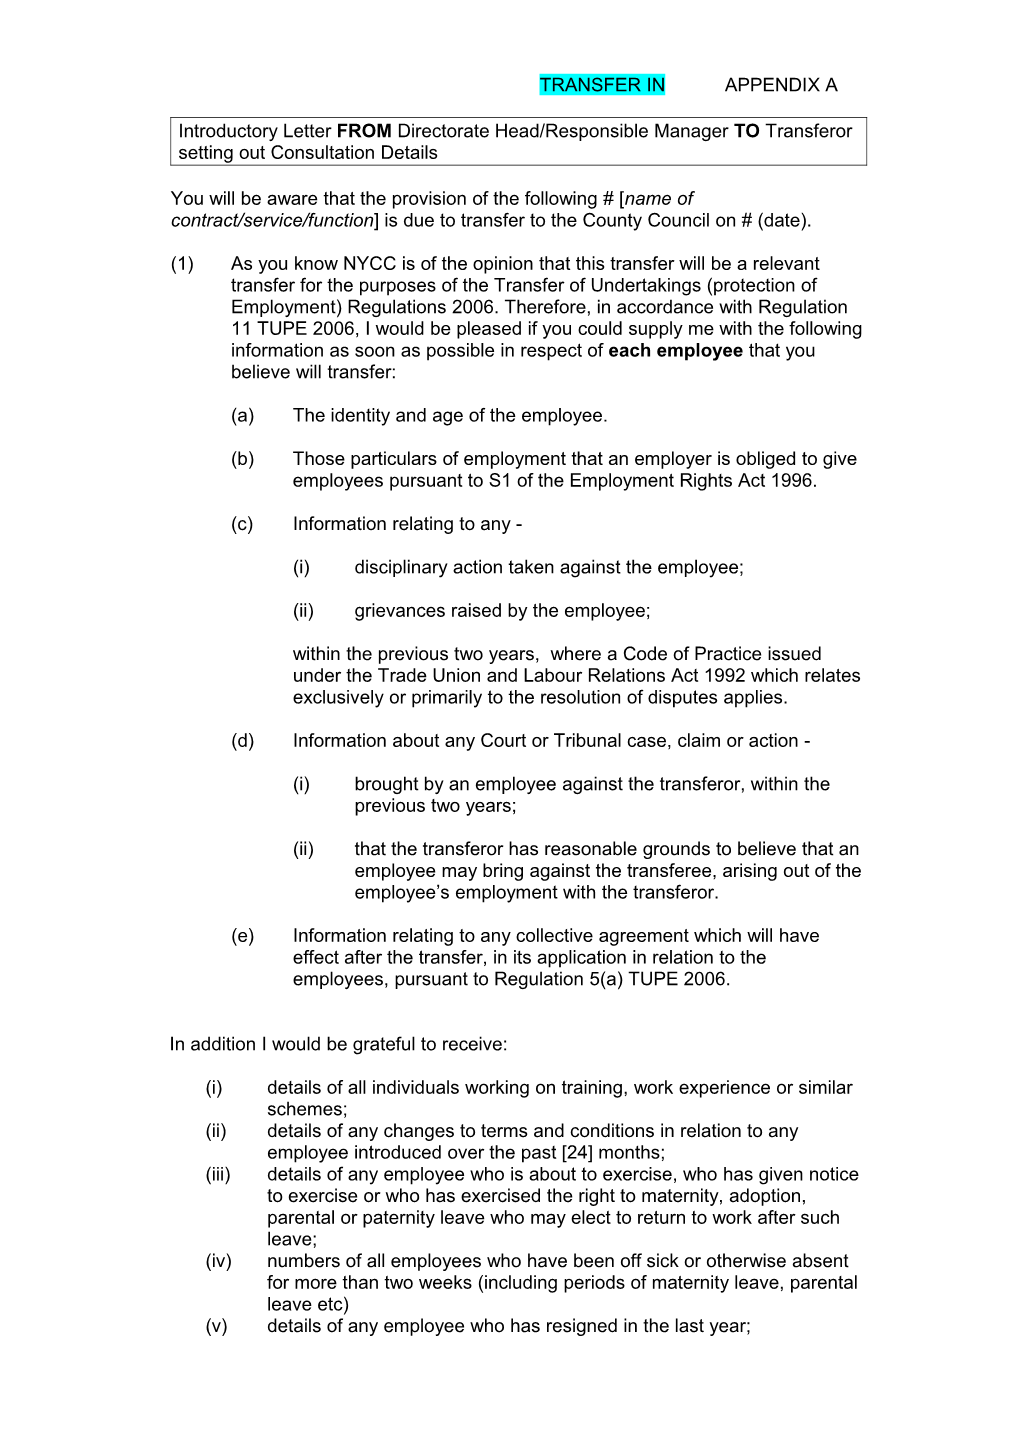 App a TUPE Letter to Transferor Organisation (Transfer IN)